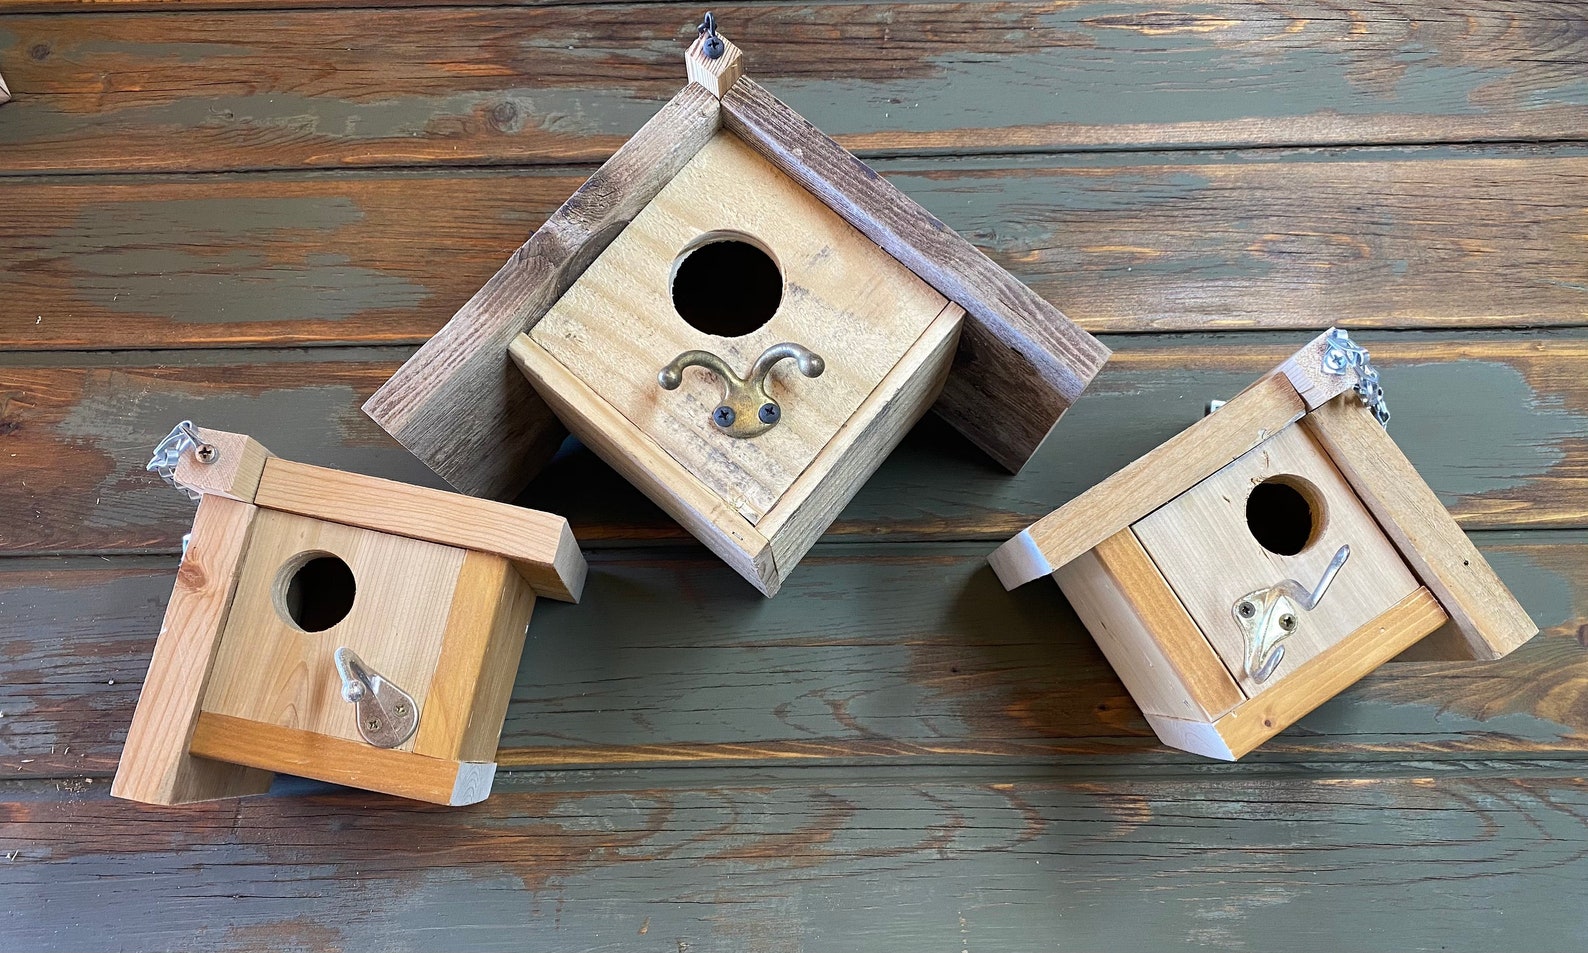 Rustic Wren Birdhouses 3 to choose from Made from reclaimed | Etsy